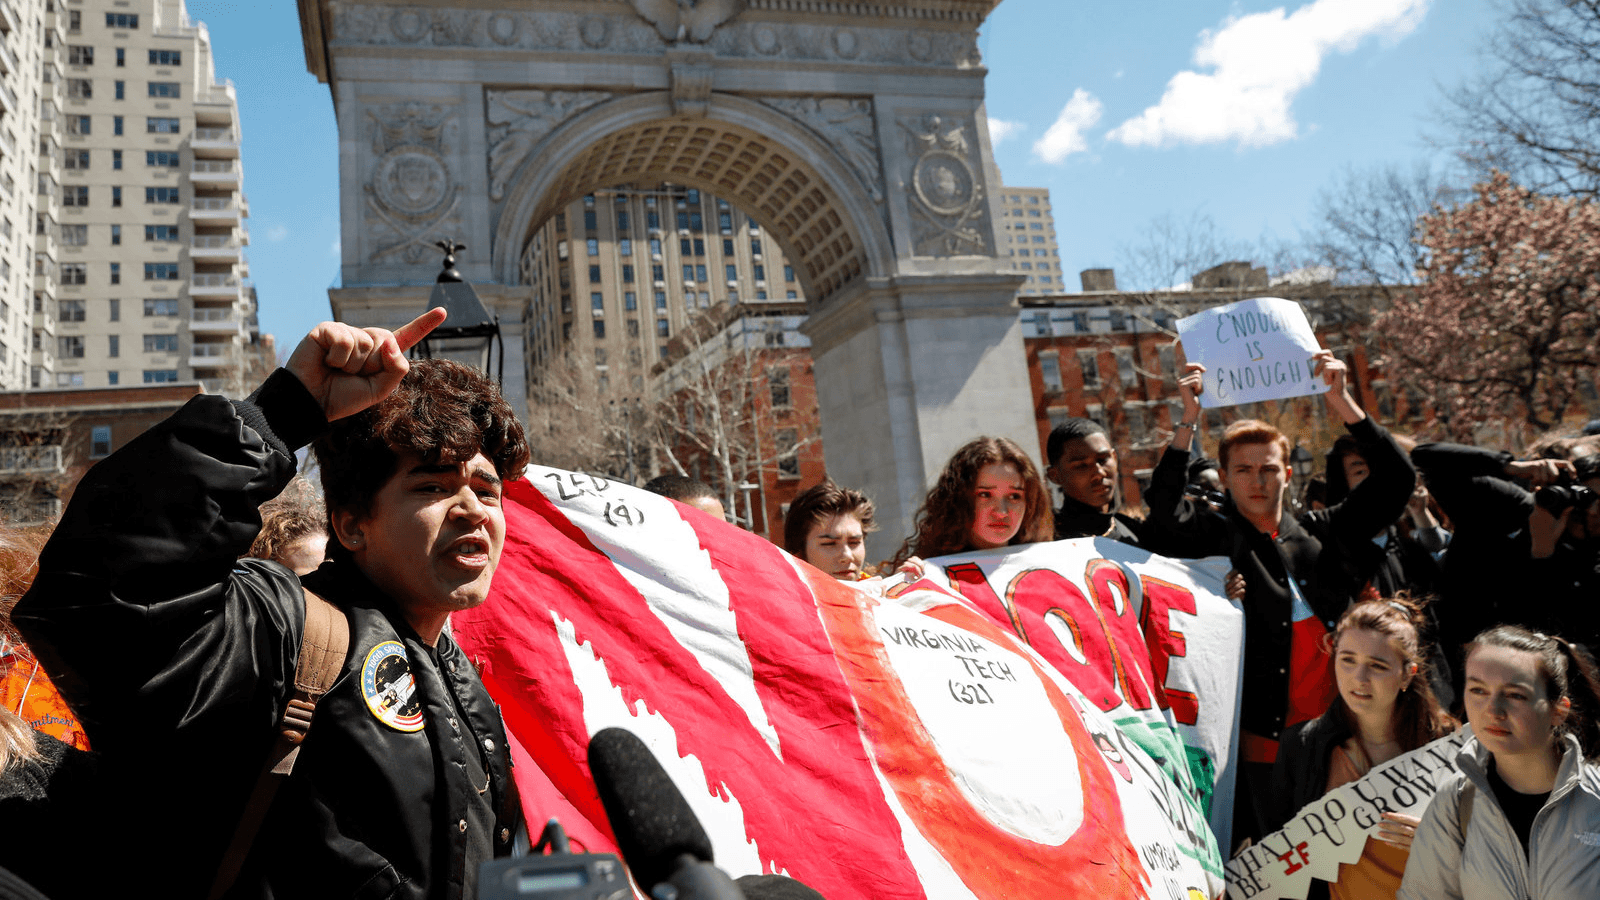 Students gather for a rally in Washington Square Park, as part of a nationwide walk-out of classes to mark the 19th anniversary of the Columbine High School mass shooting, in New York City on April 20, 2018.